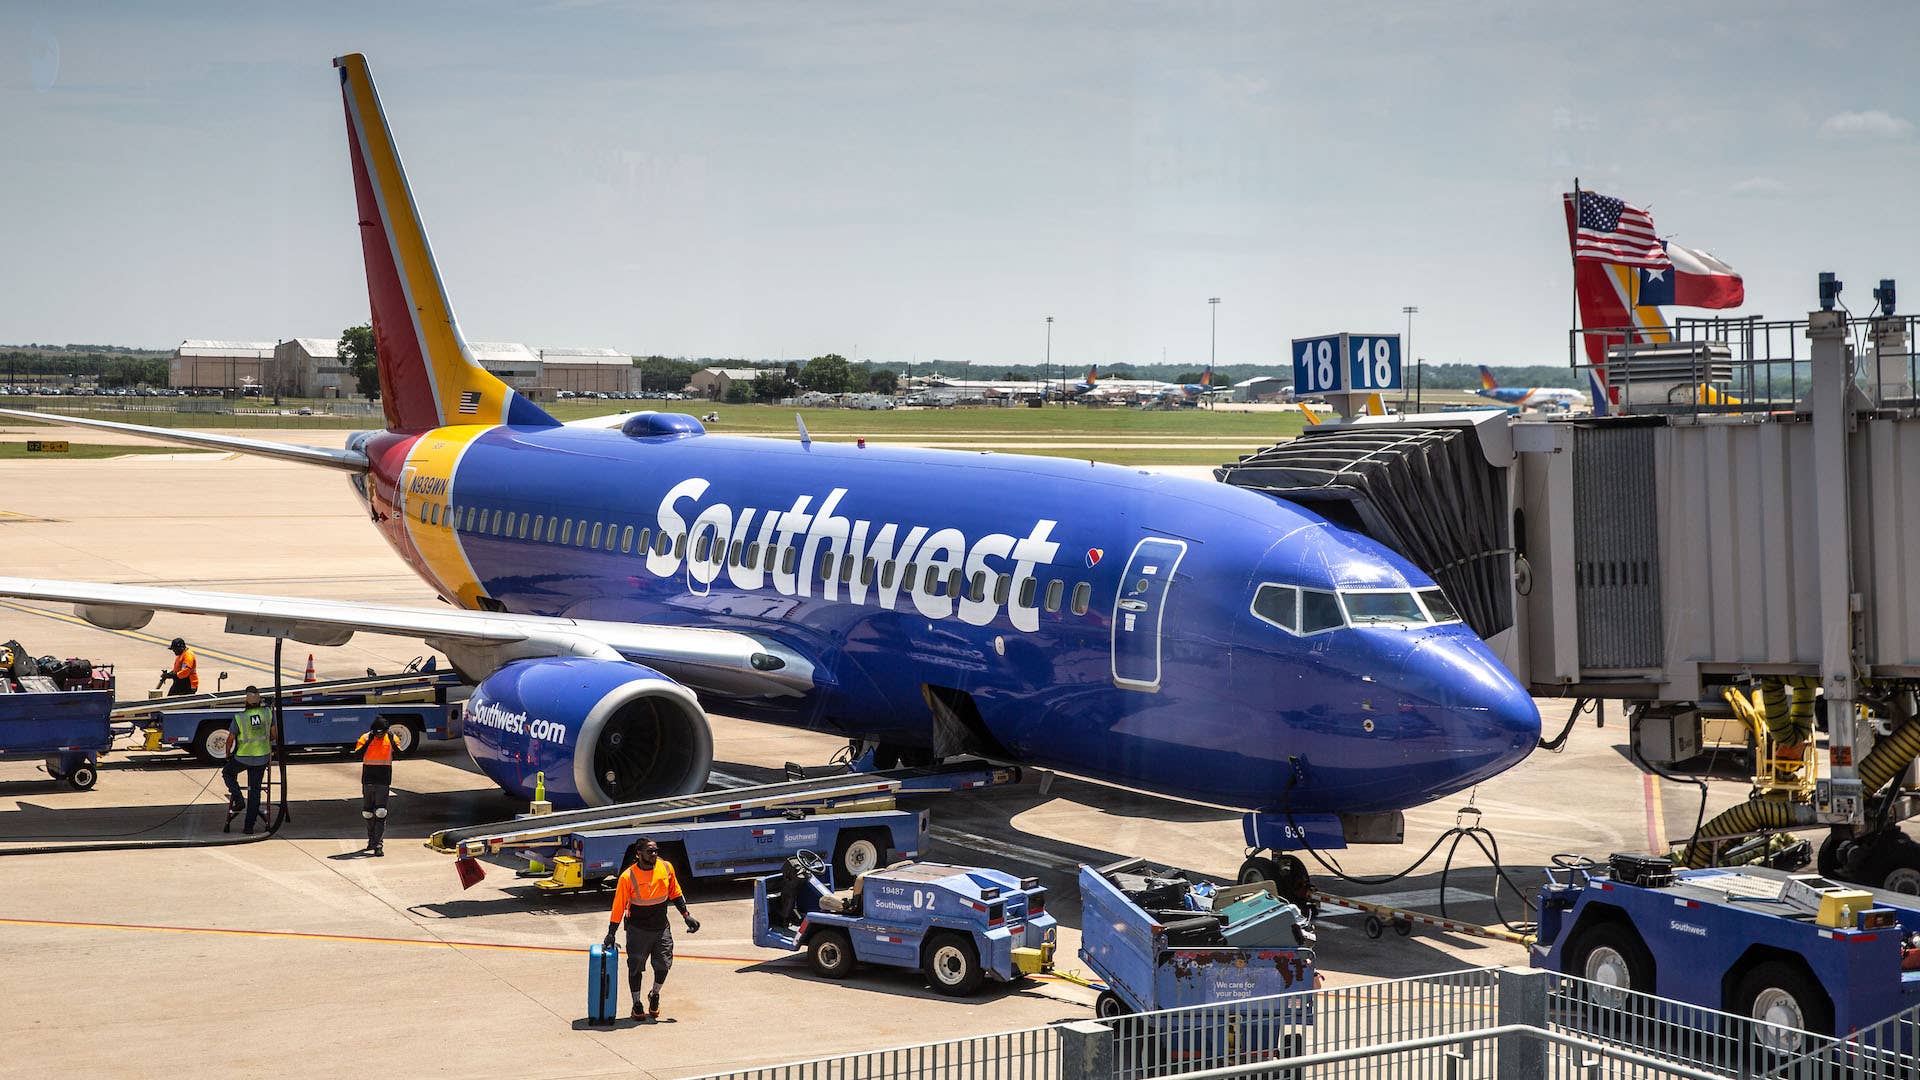 Photograph of a Southwest Airlines airplane